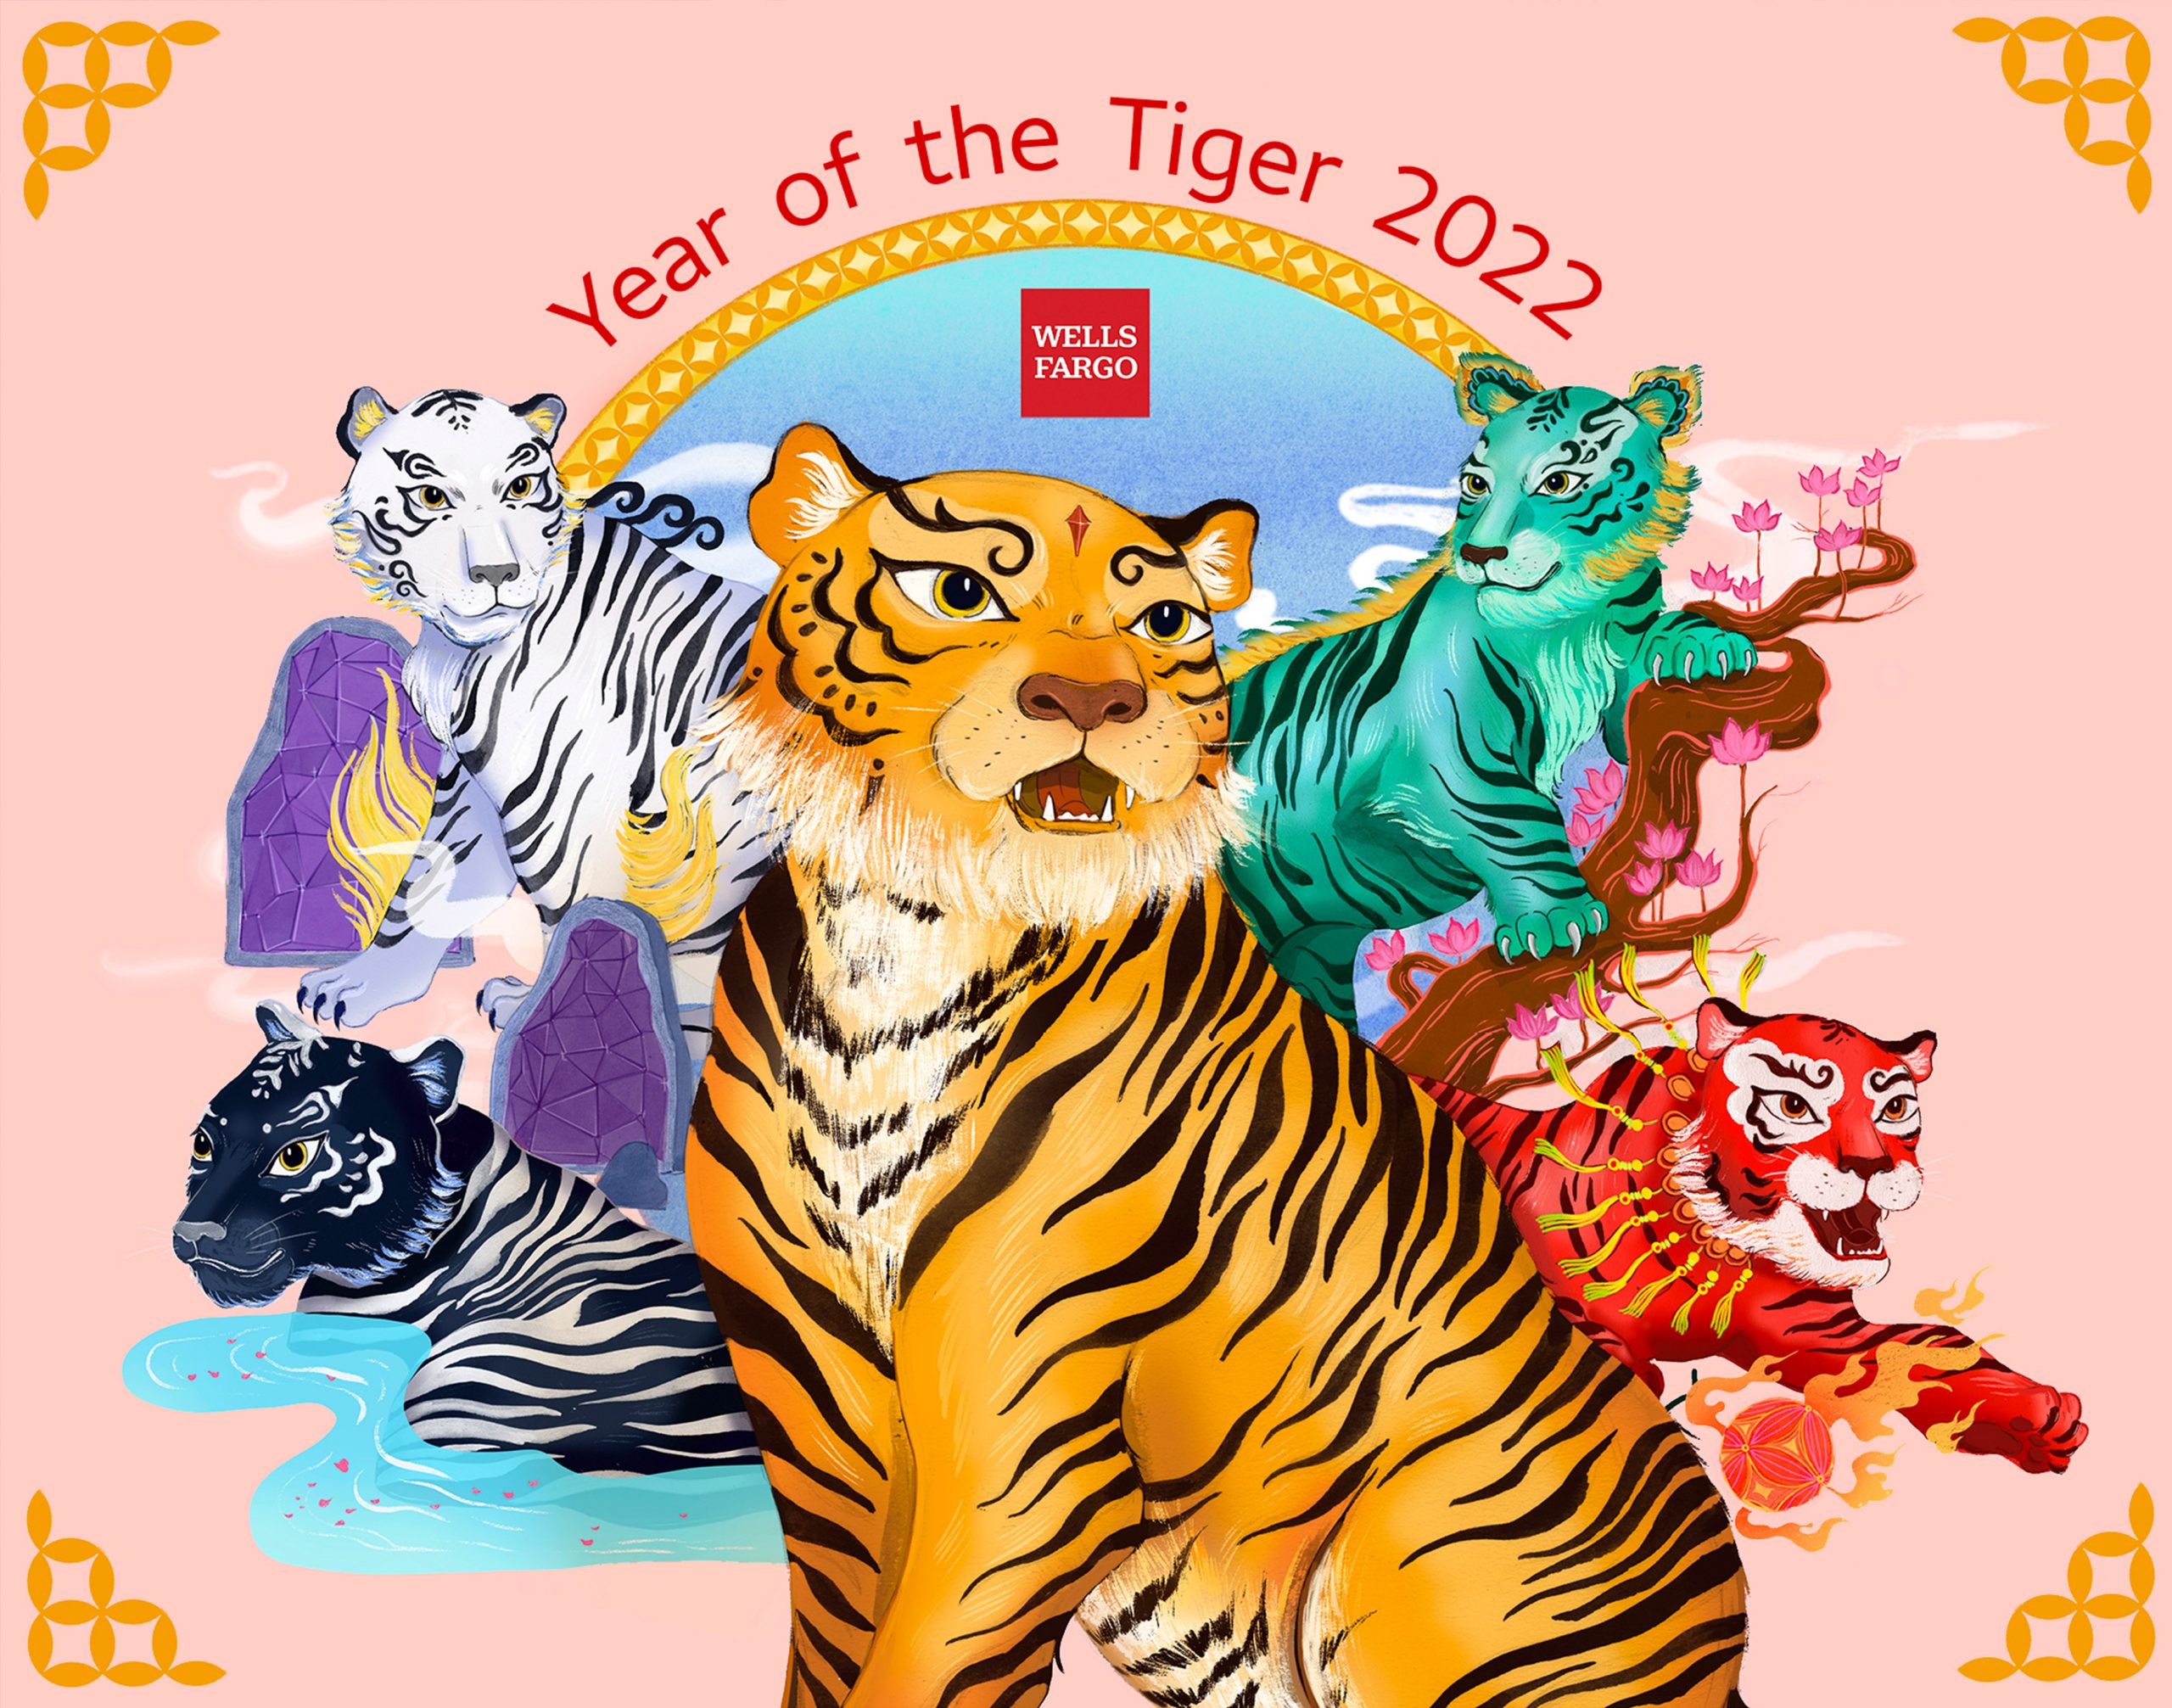 Calendar cover showing five tigers in different colors.